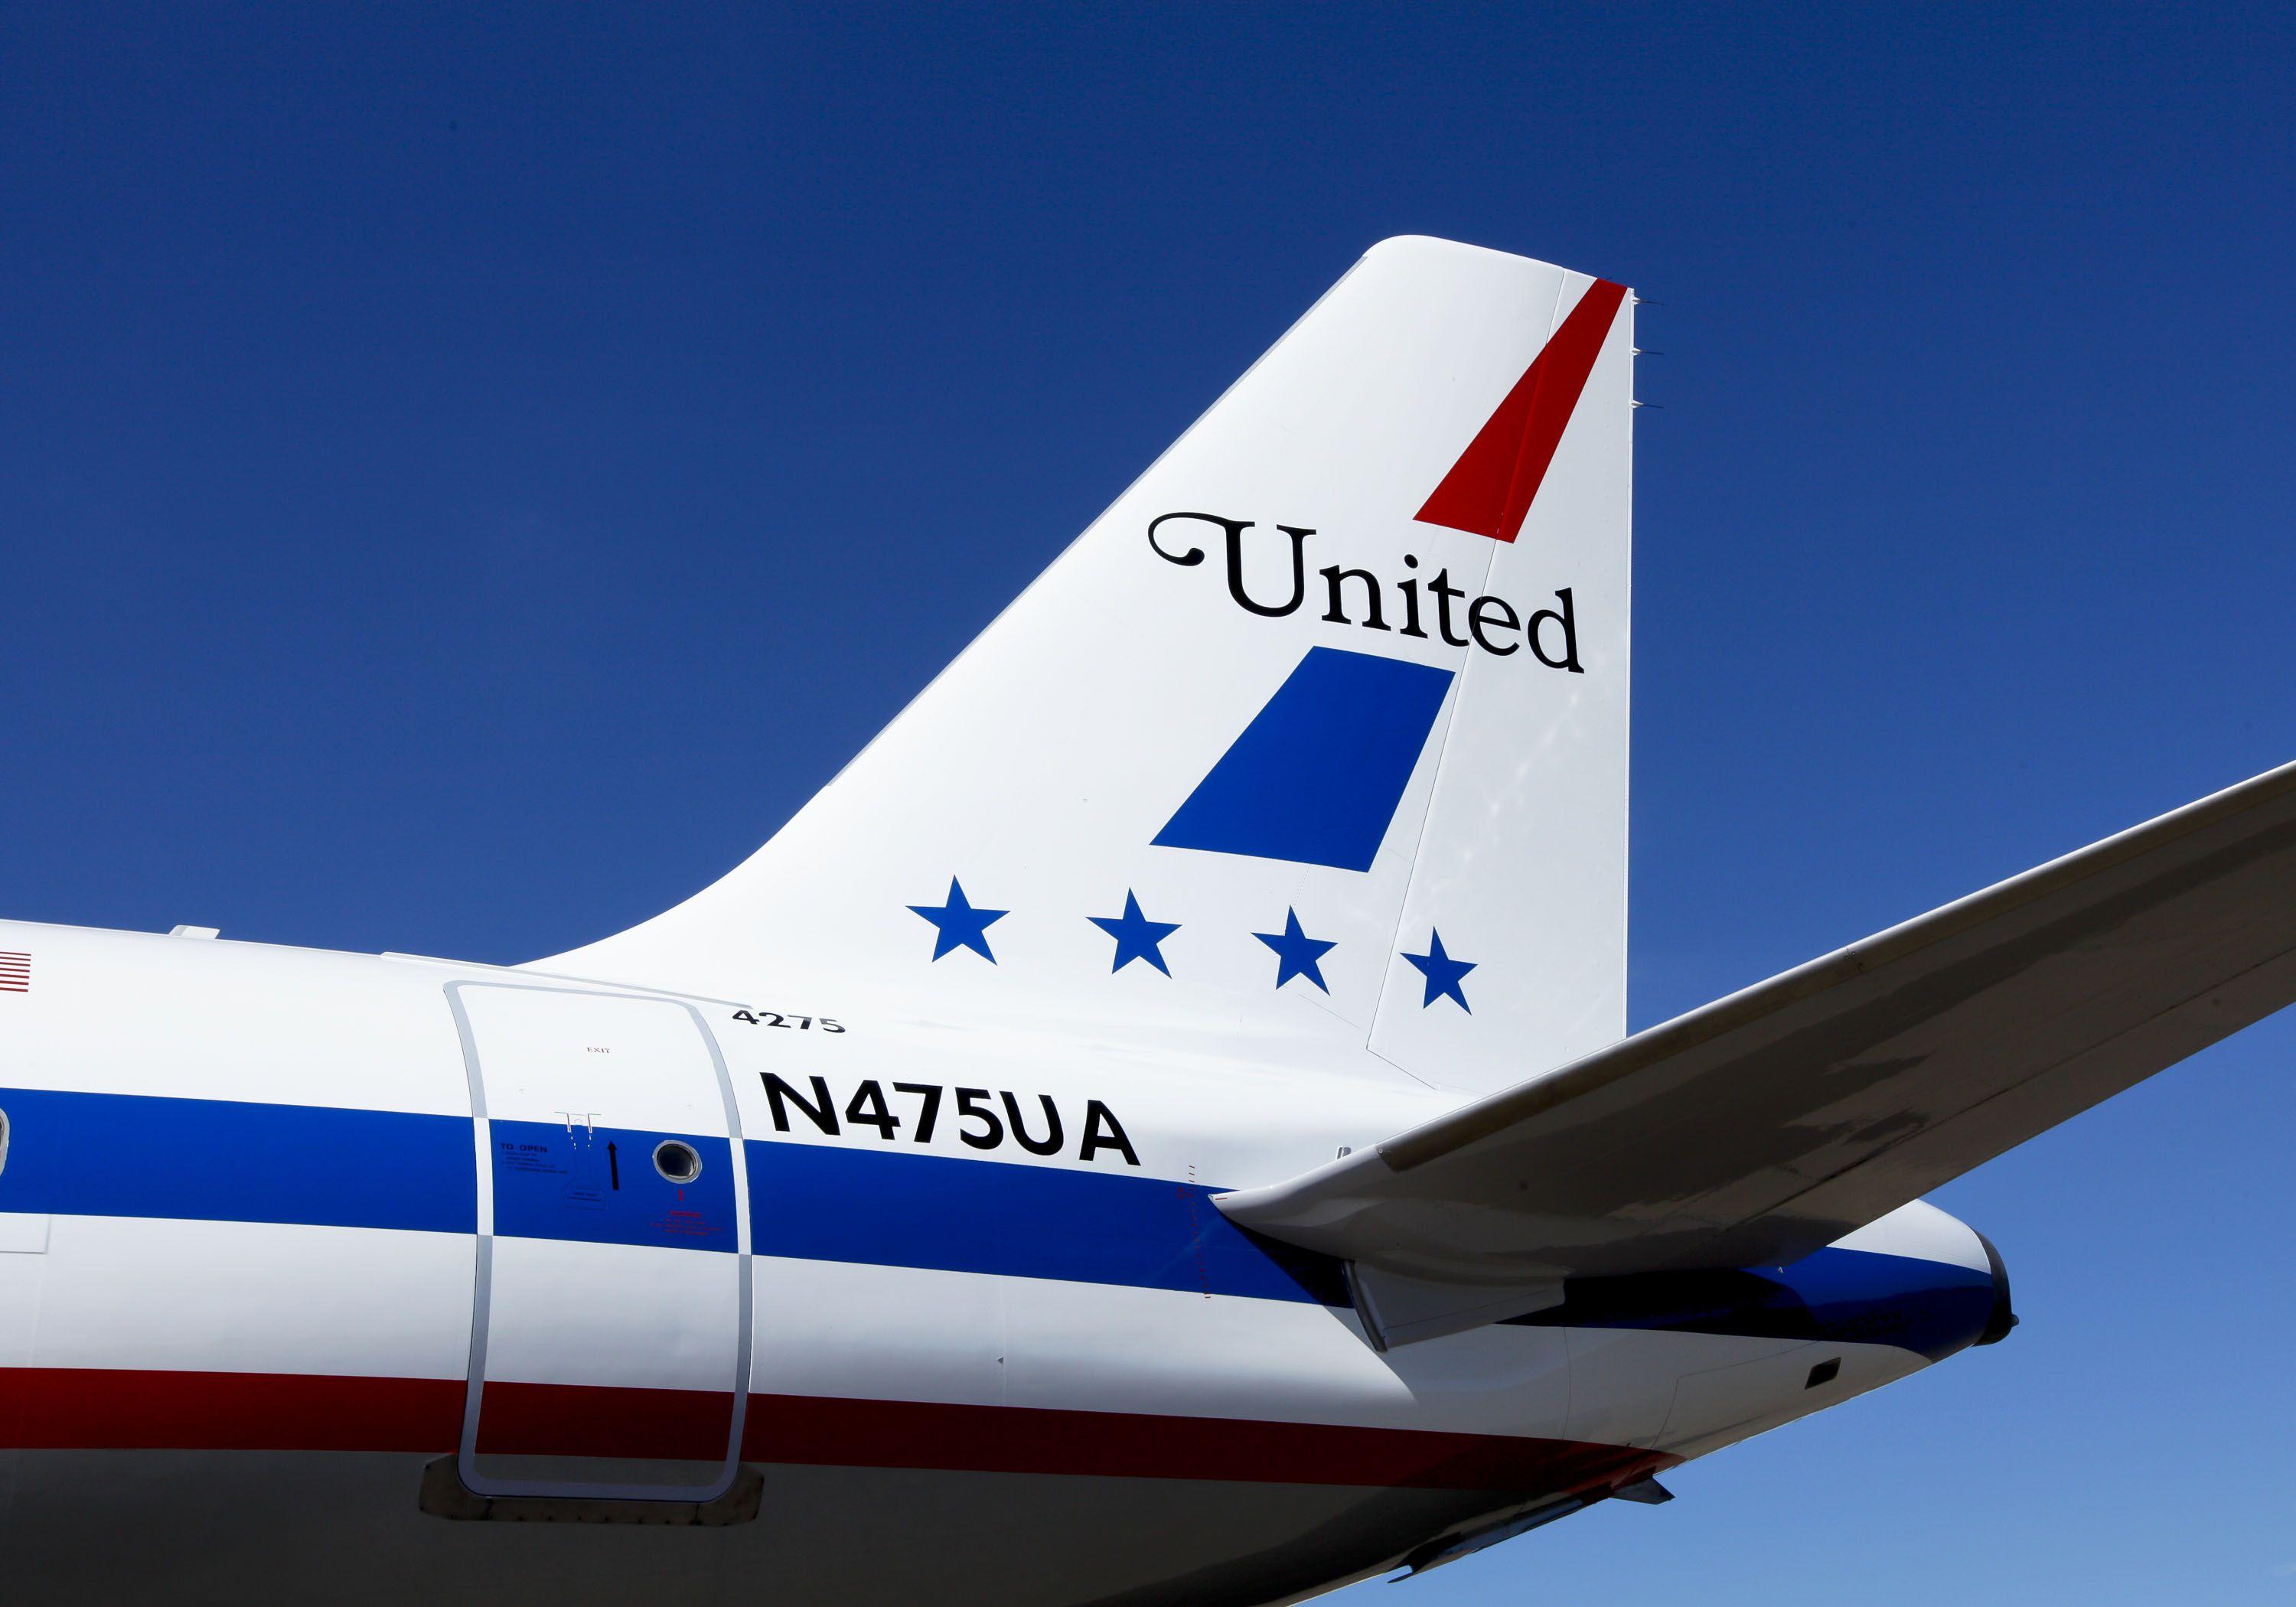 United Airlines Tail Logo - PHOTOS: United Airline's Retro 